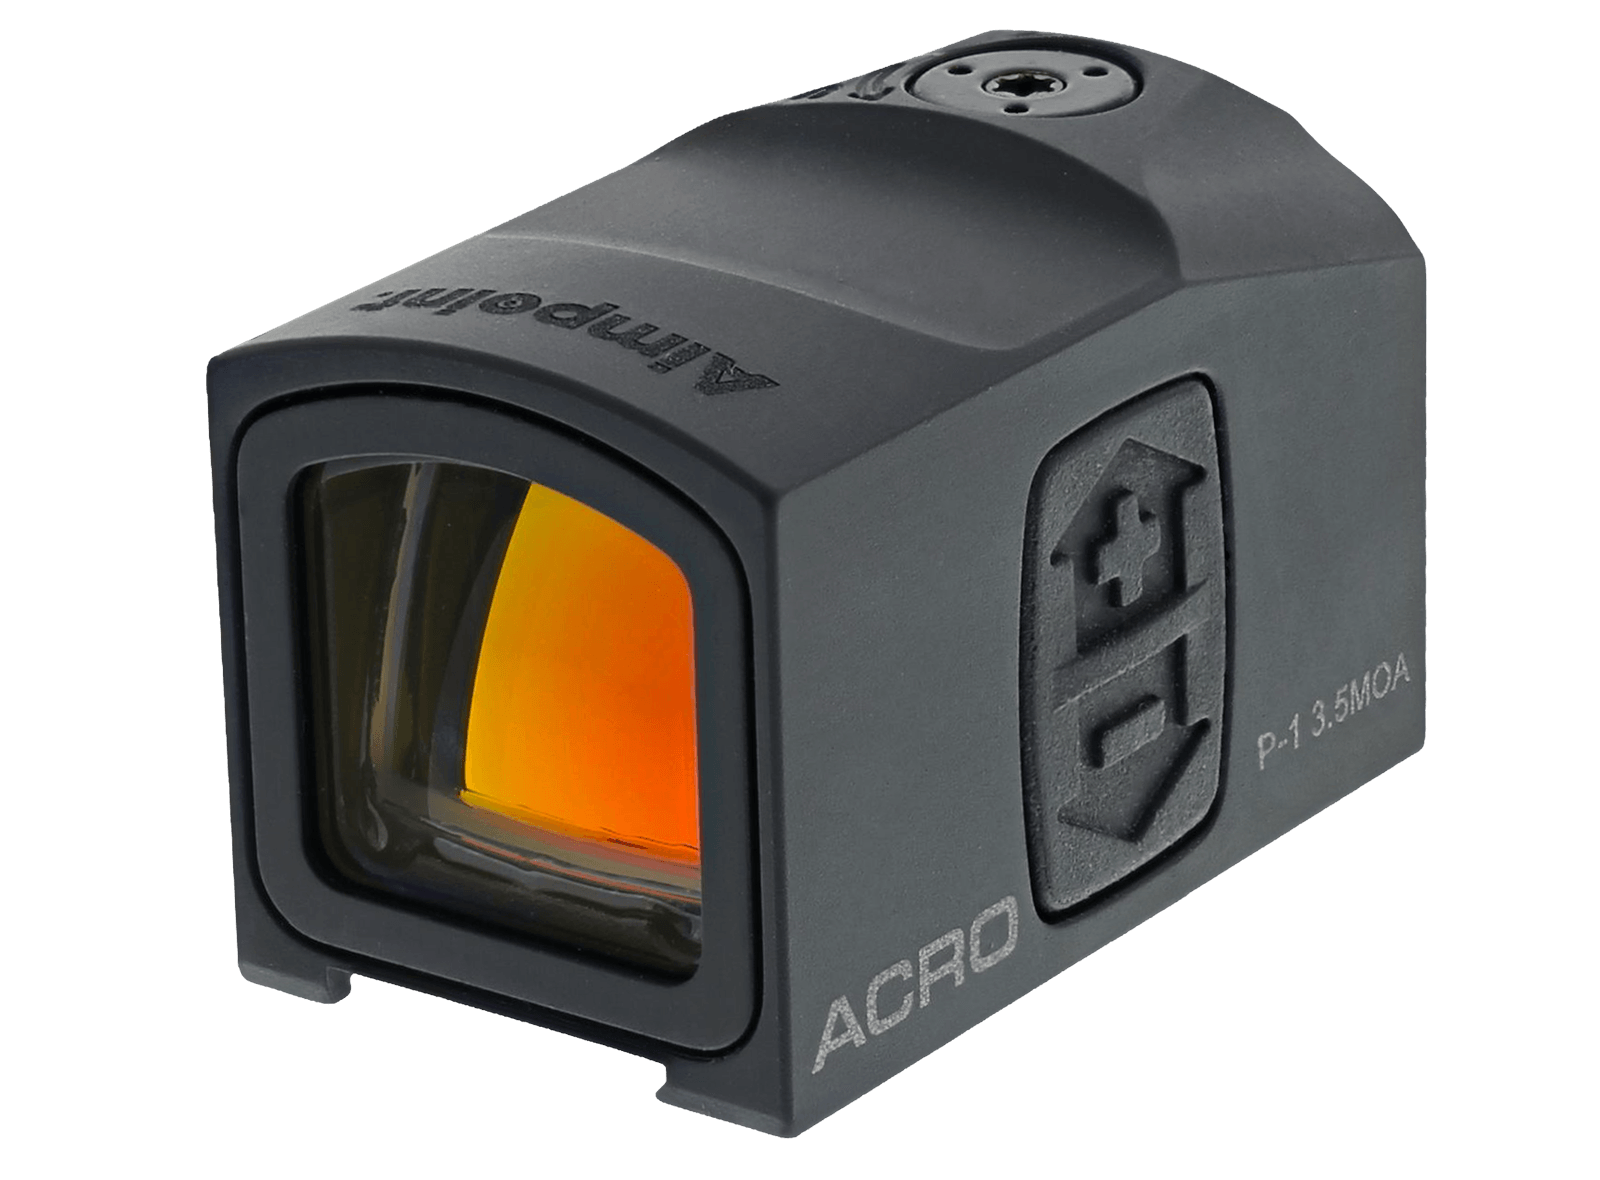 Aimpoint Acro P-1 Red dot sight